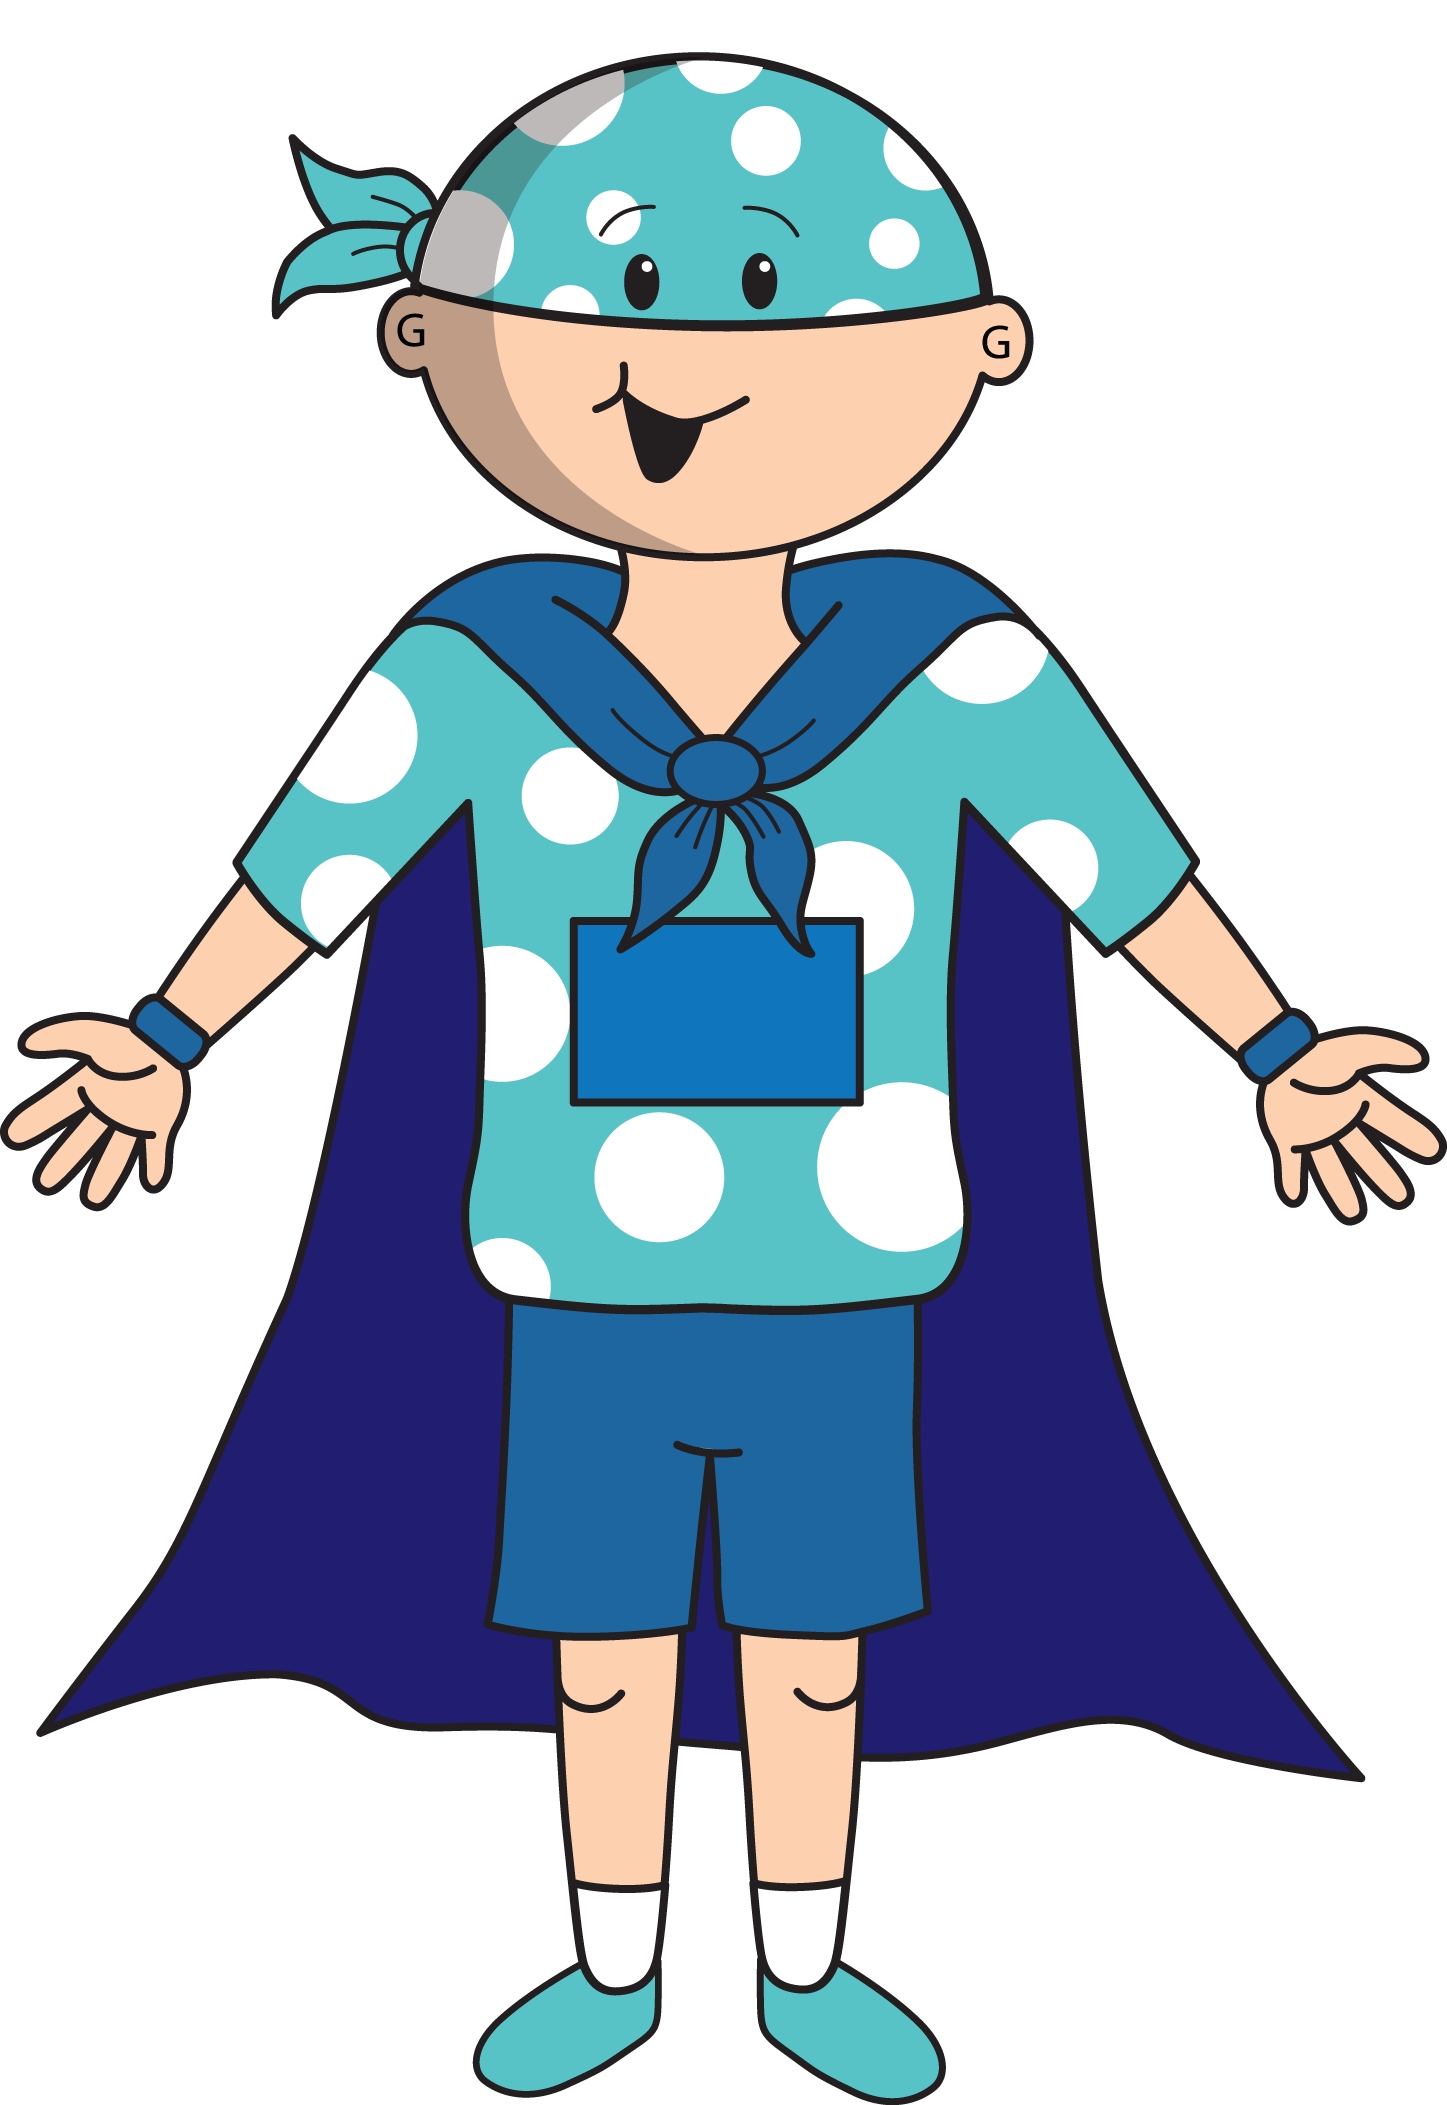 Illustration about a young boy dressed as a superhero in a blue polka-dotted cape and bandana, standing with arms outstretched, smiling.